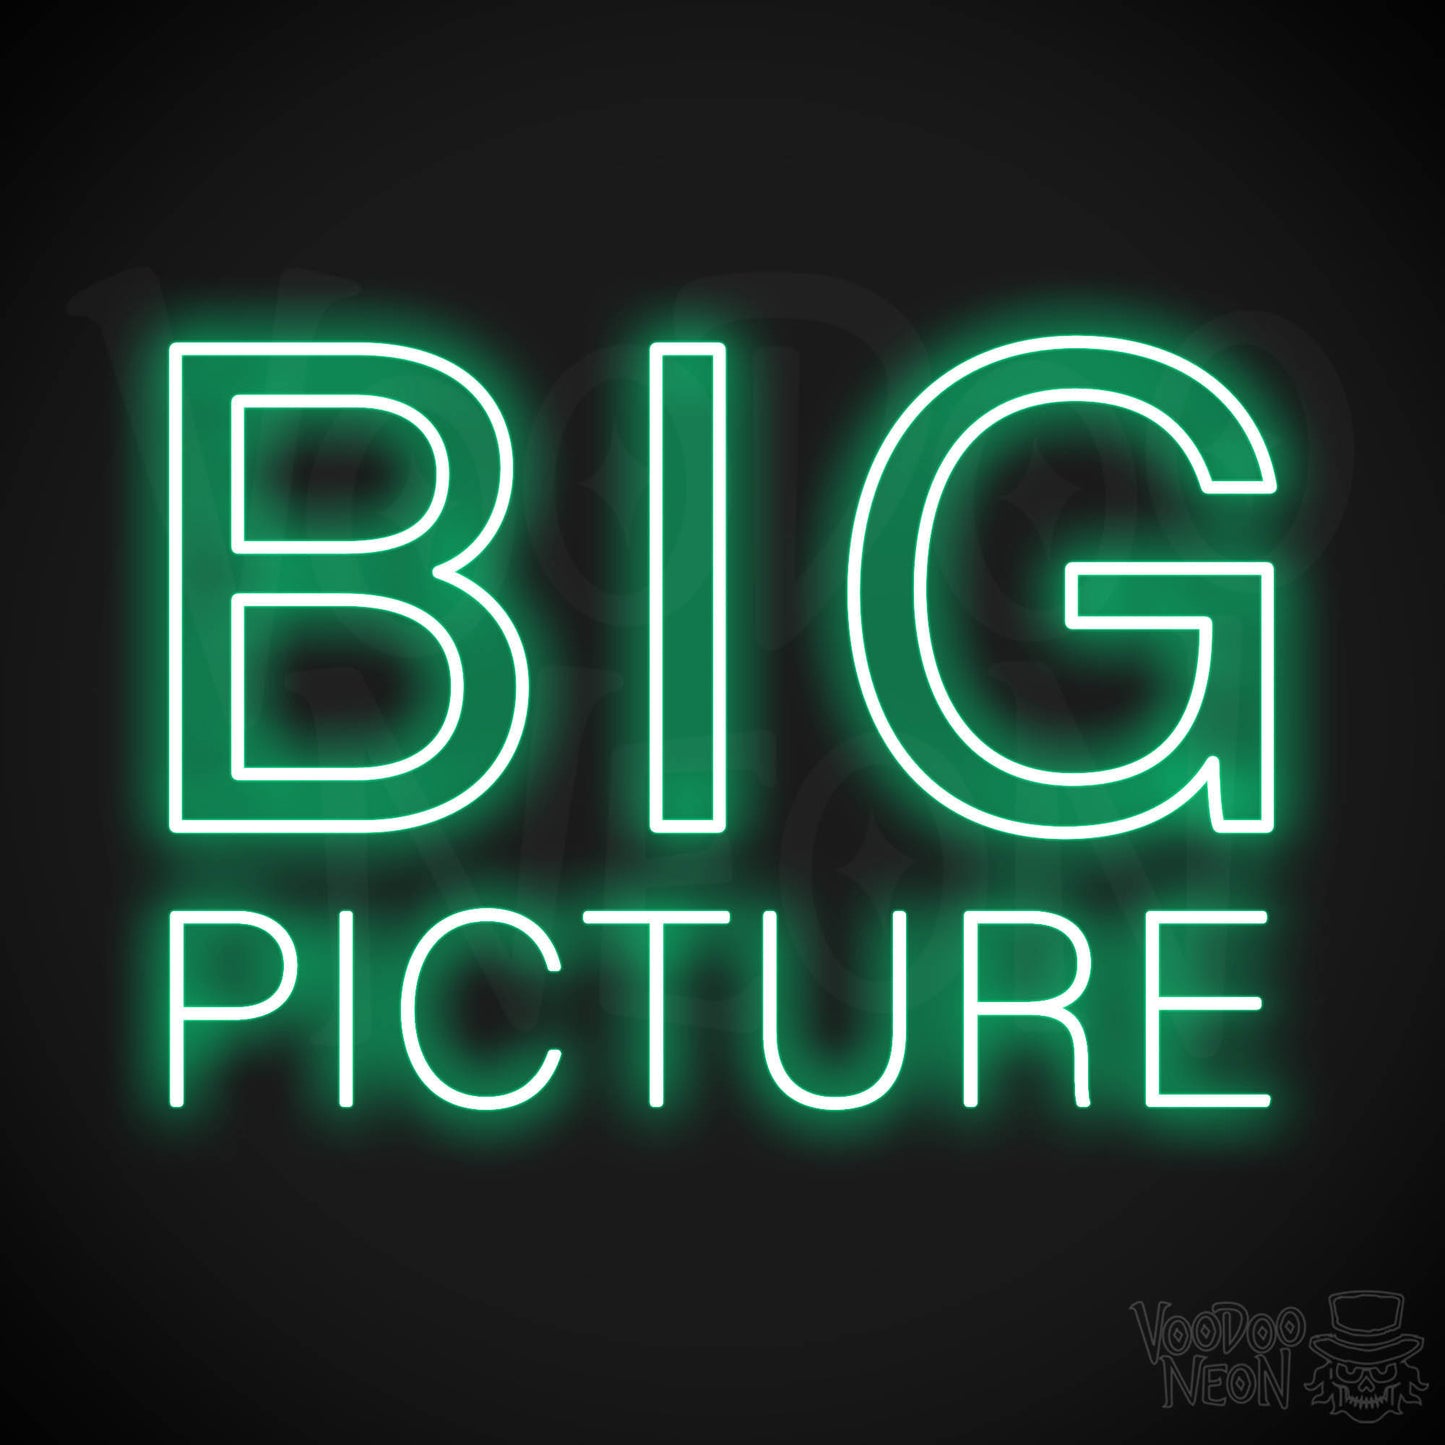 Big Picture LED Neon - Green